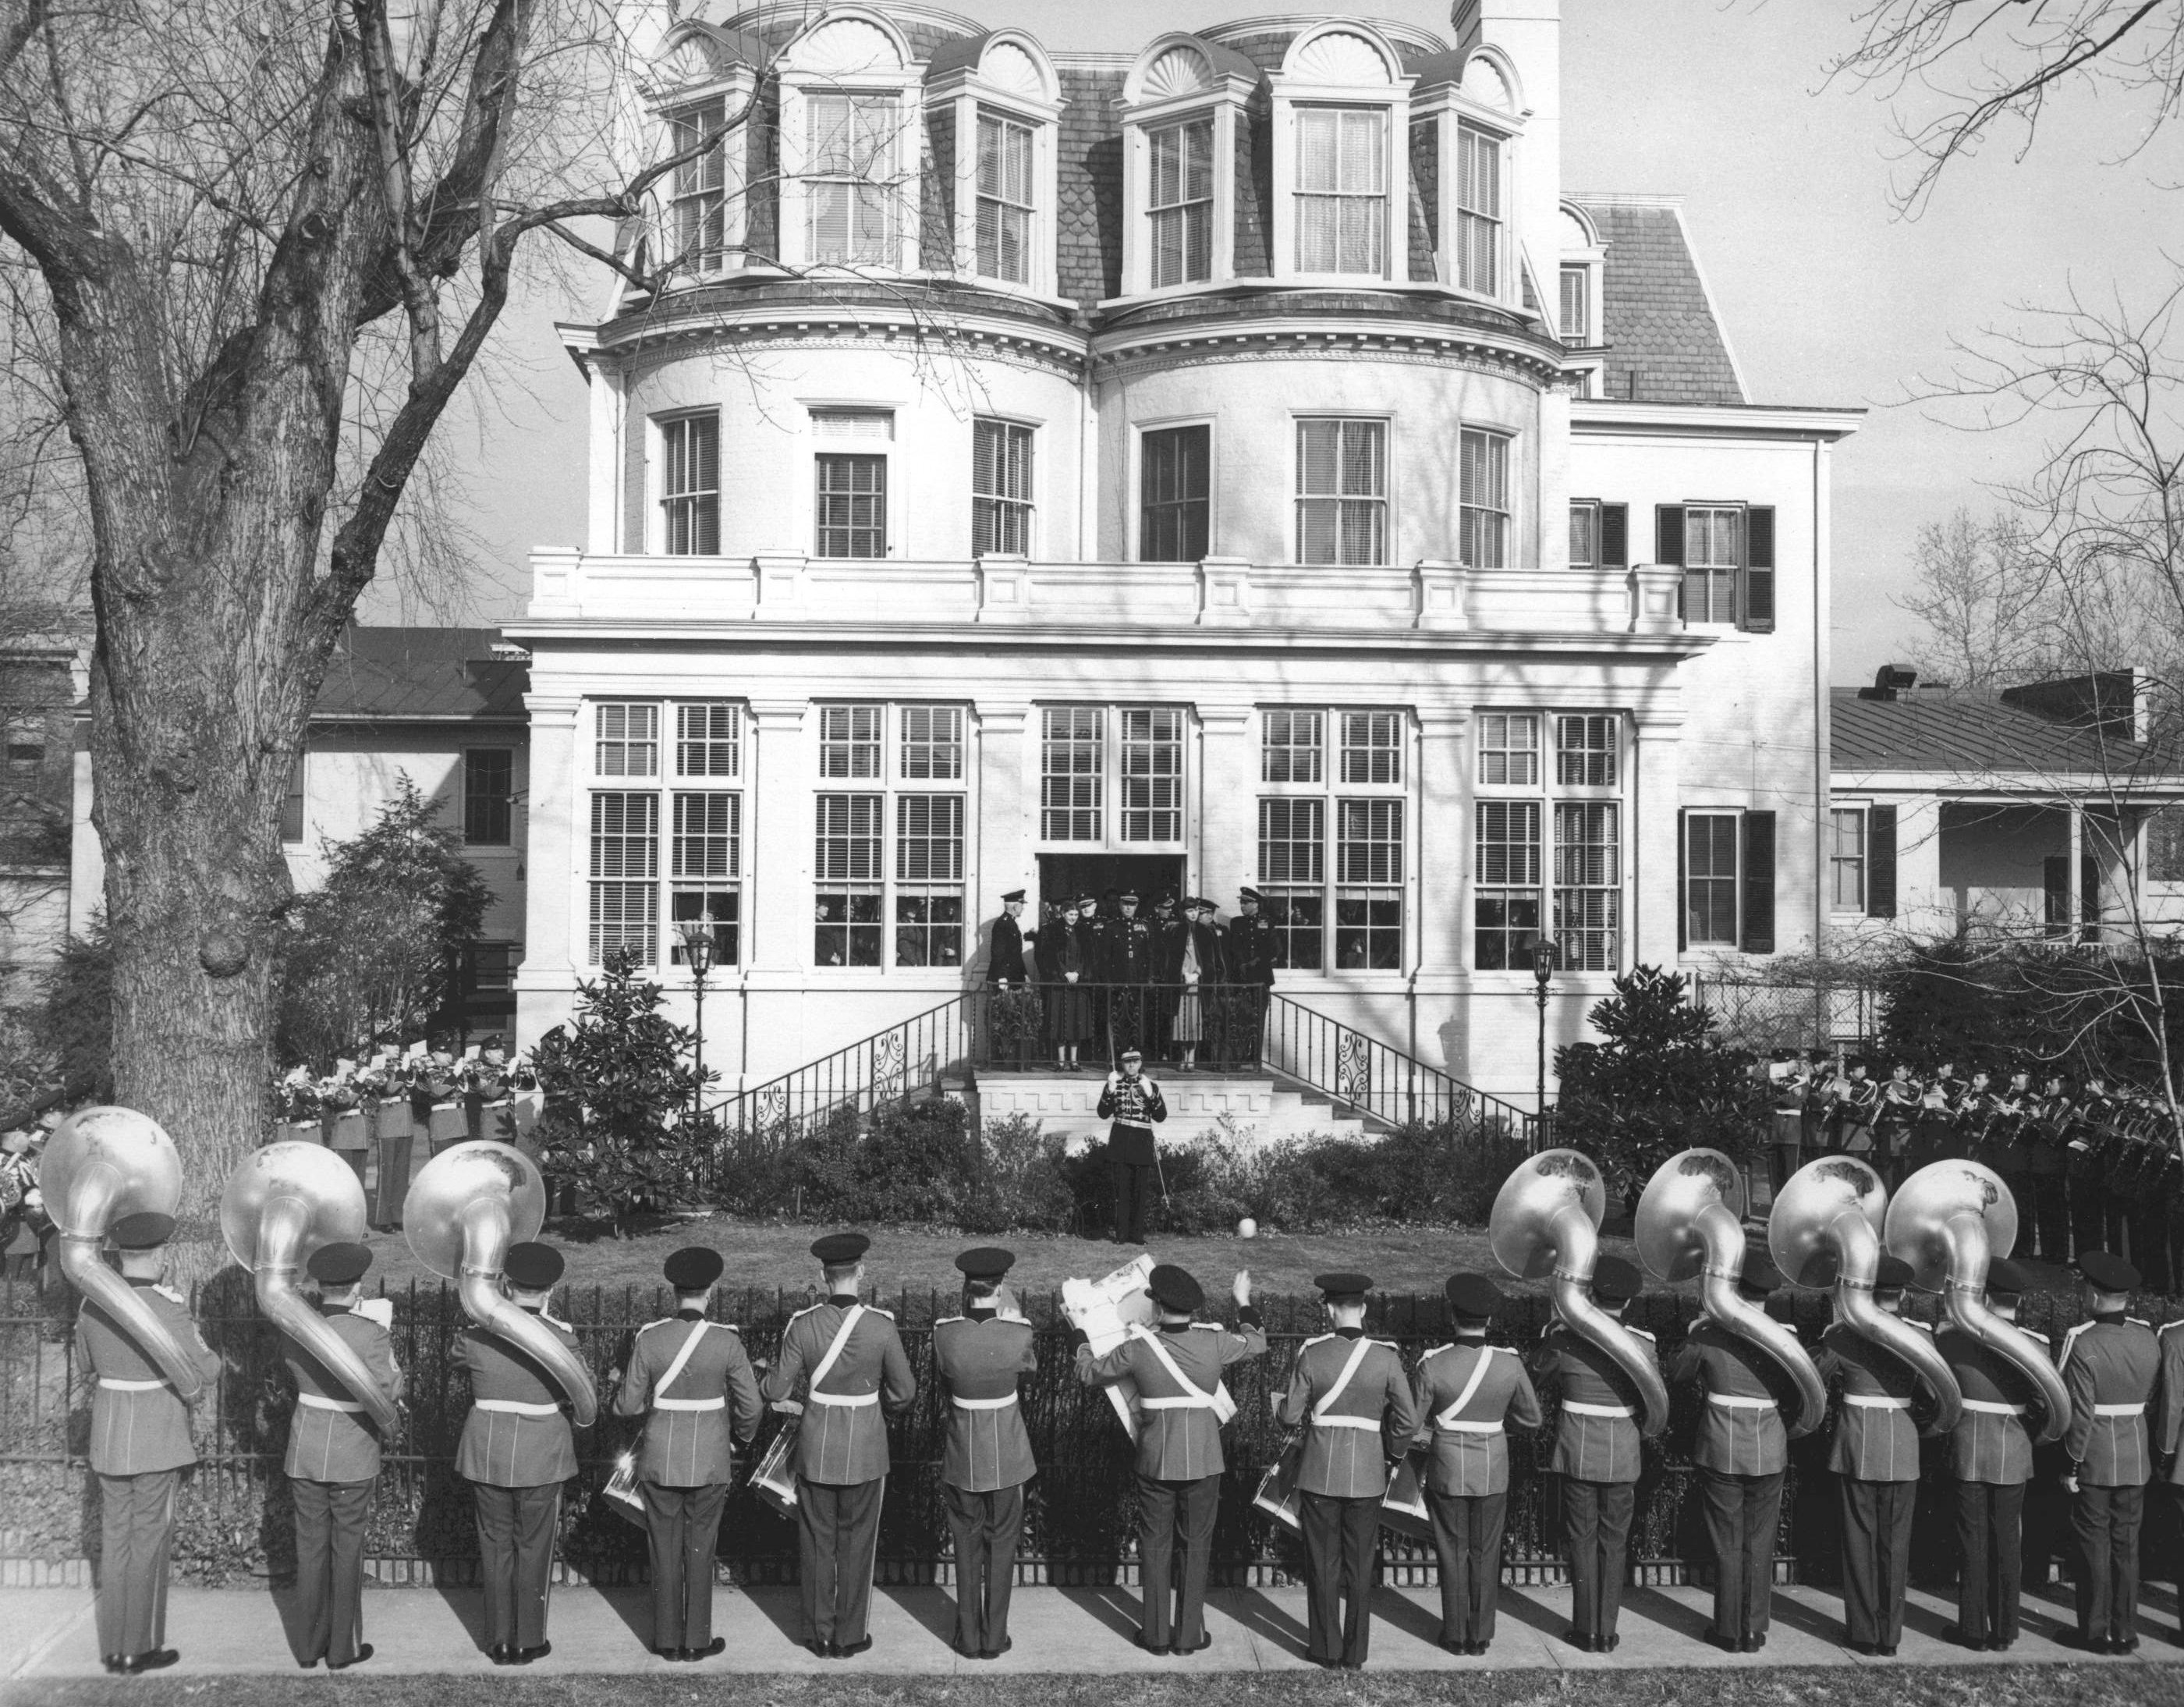 US Marine Corps Band, directed by Major William Santleman, playing for Commandant Clifton Cates, Washington DC, United States, 1 Jan 1951